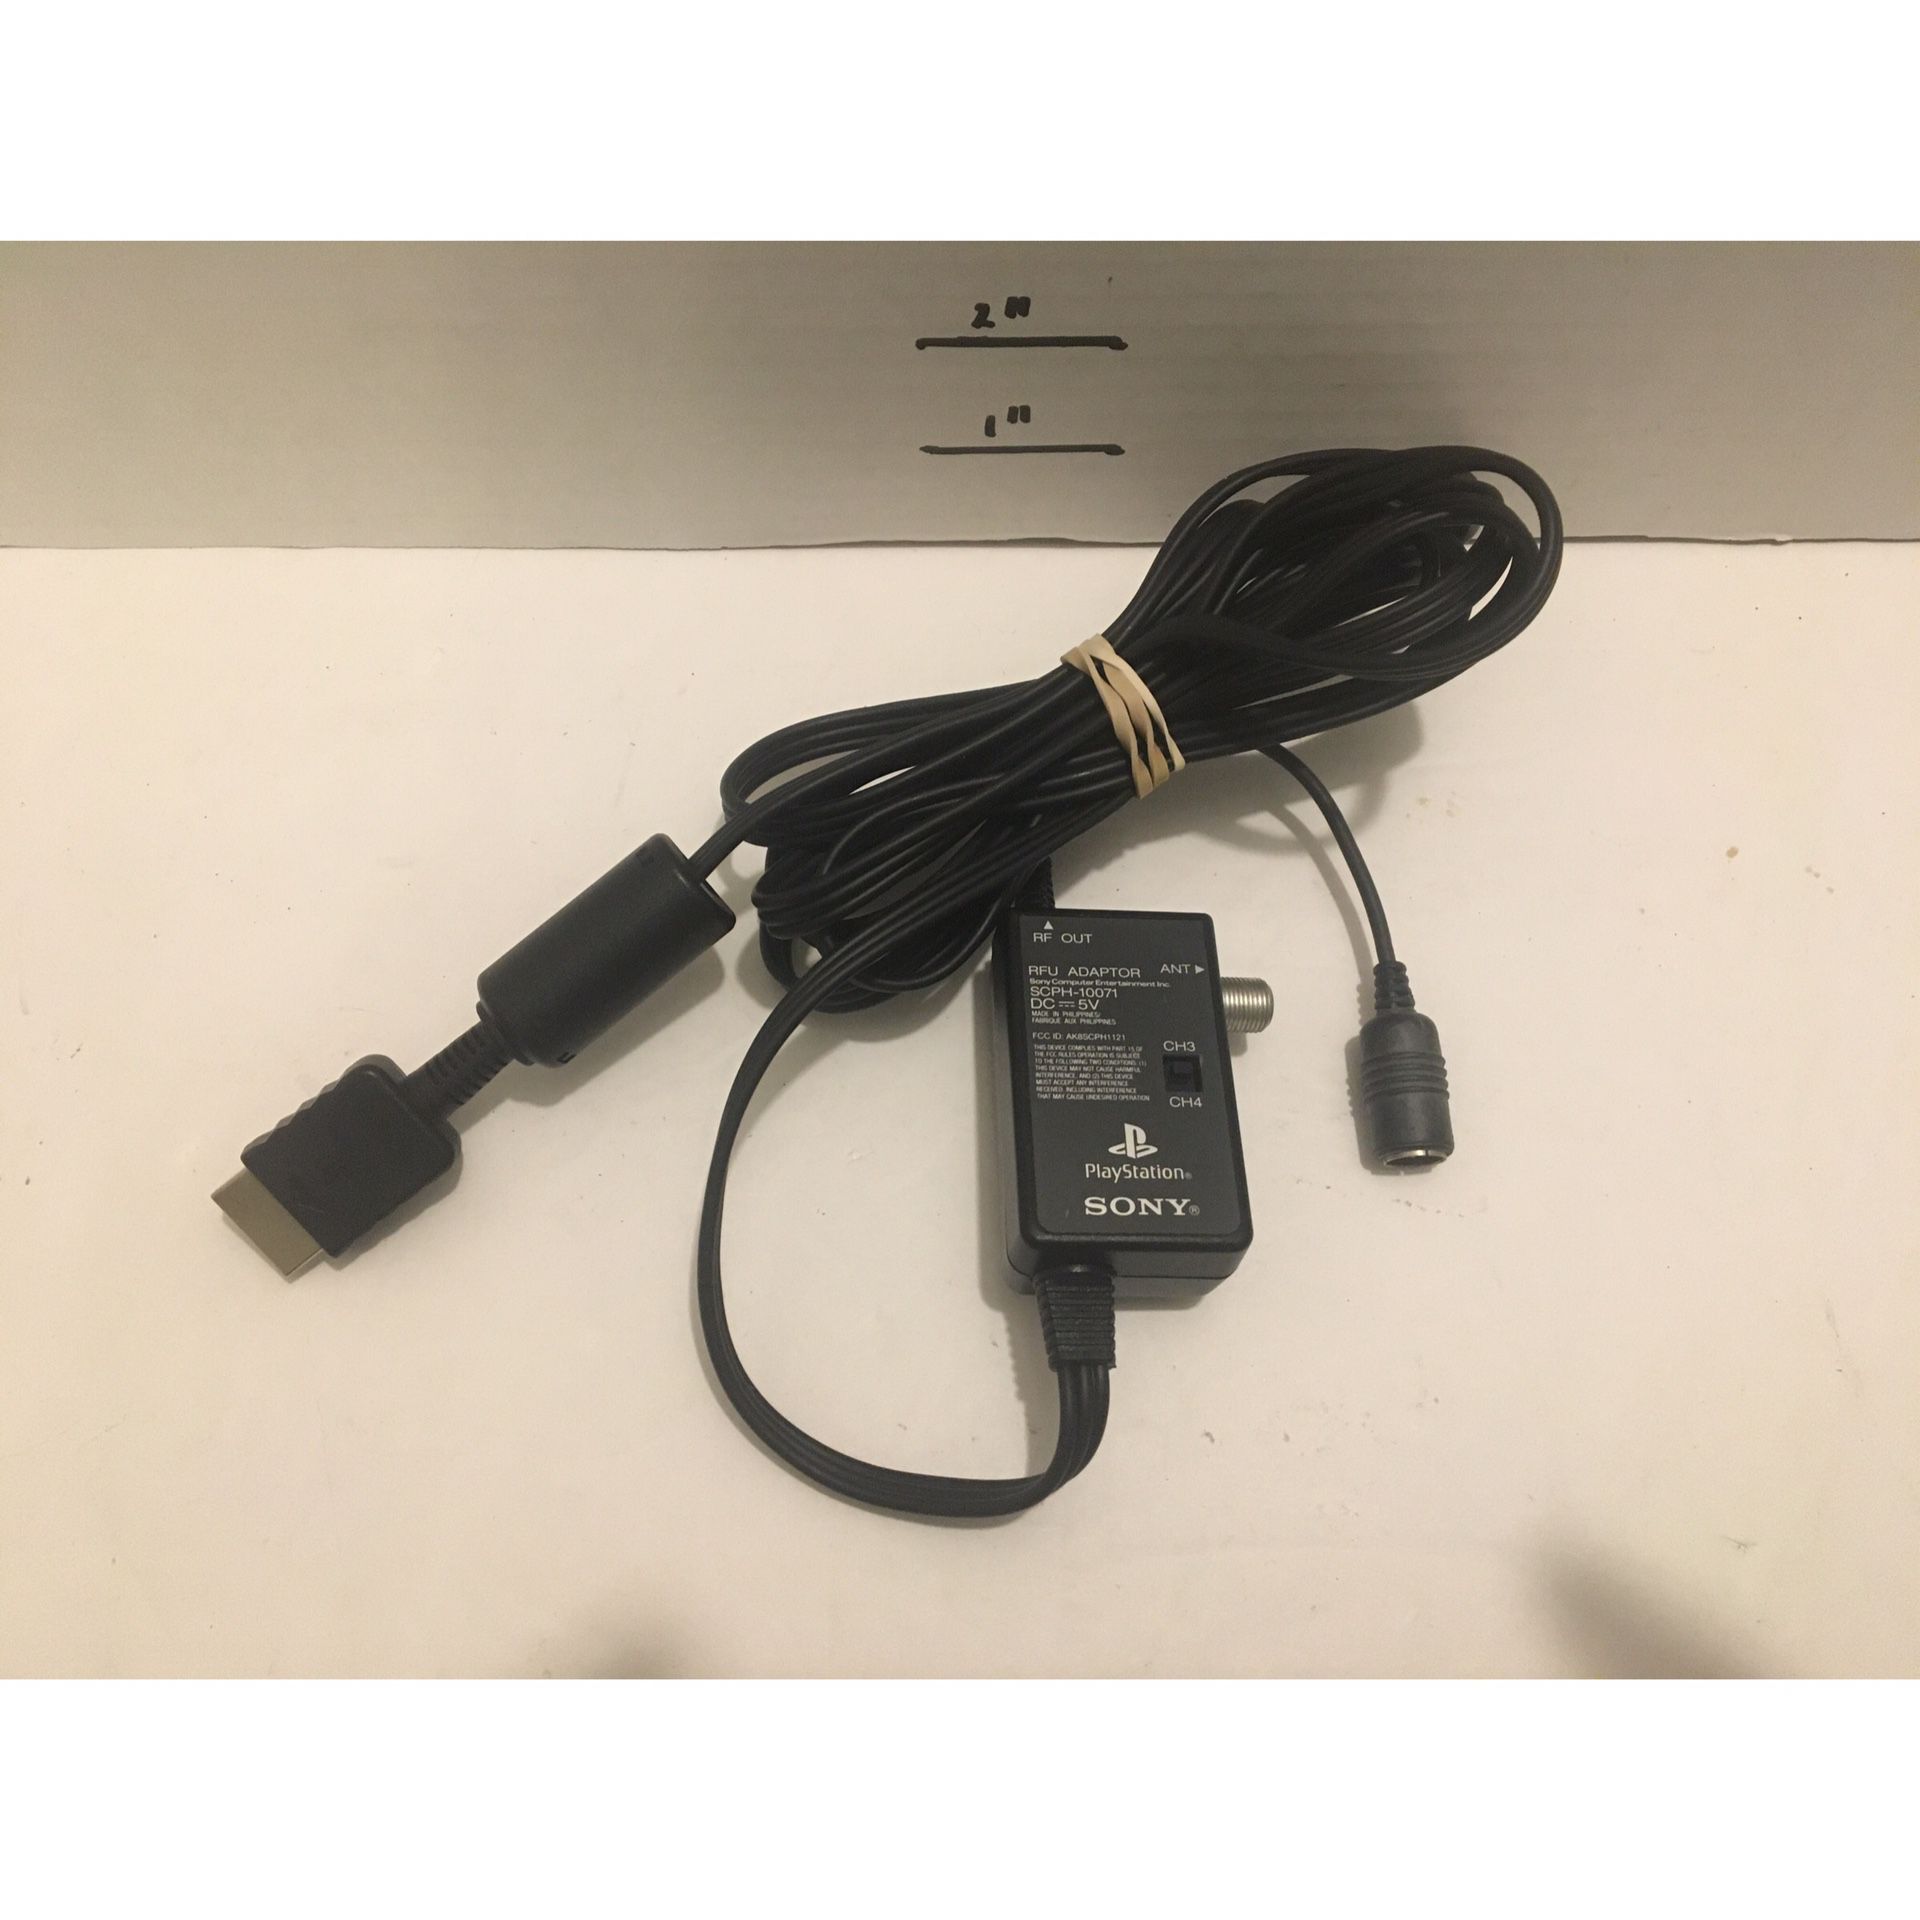 Vintage Sony Brand RFU Adapter For PS1 PS2 model SCPH-10071